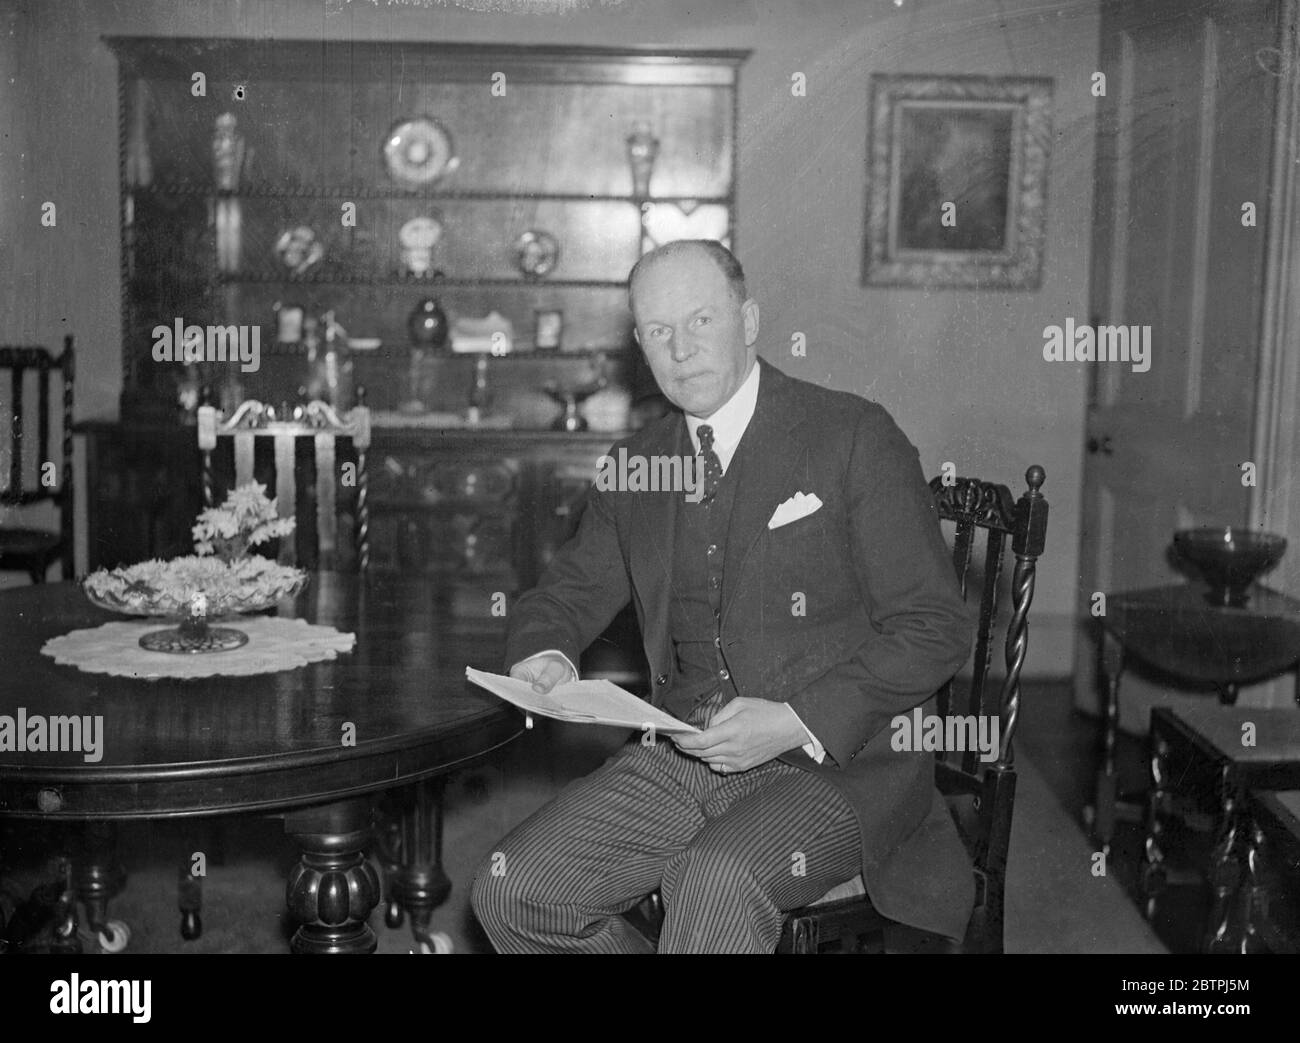 New Metropolitan magistrates . Sir Gervais Rentoul , K C , MP , has been appointed , with Mr Geoffrey Keith Rose , the barrister , as a Metropolitan Magistrate to fill the vacancies caused by the death of Mr J A R Cairns and the retirement of Mr Frederick Mead . Photo shows ; Sir Gervais Rentoul reading the news of his appointment in his London home . 3 January 1934 Stock Photo